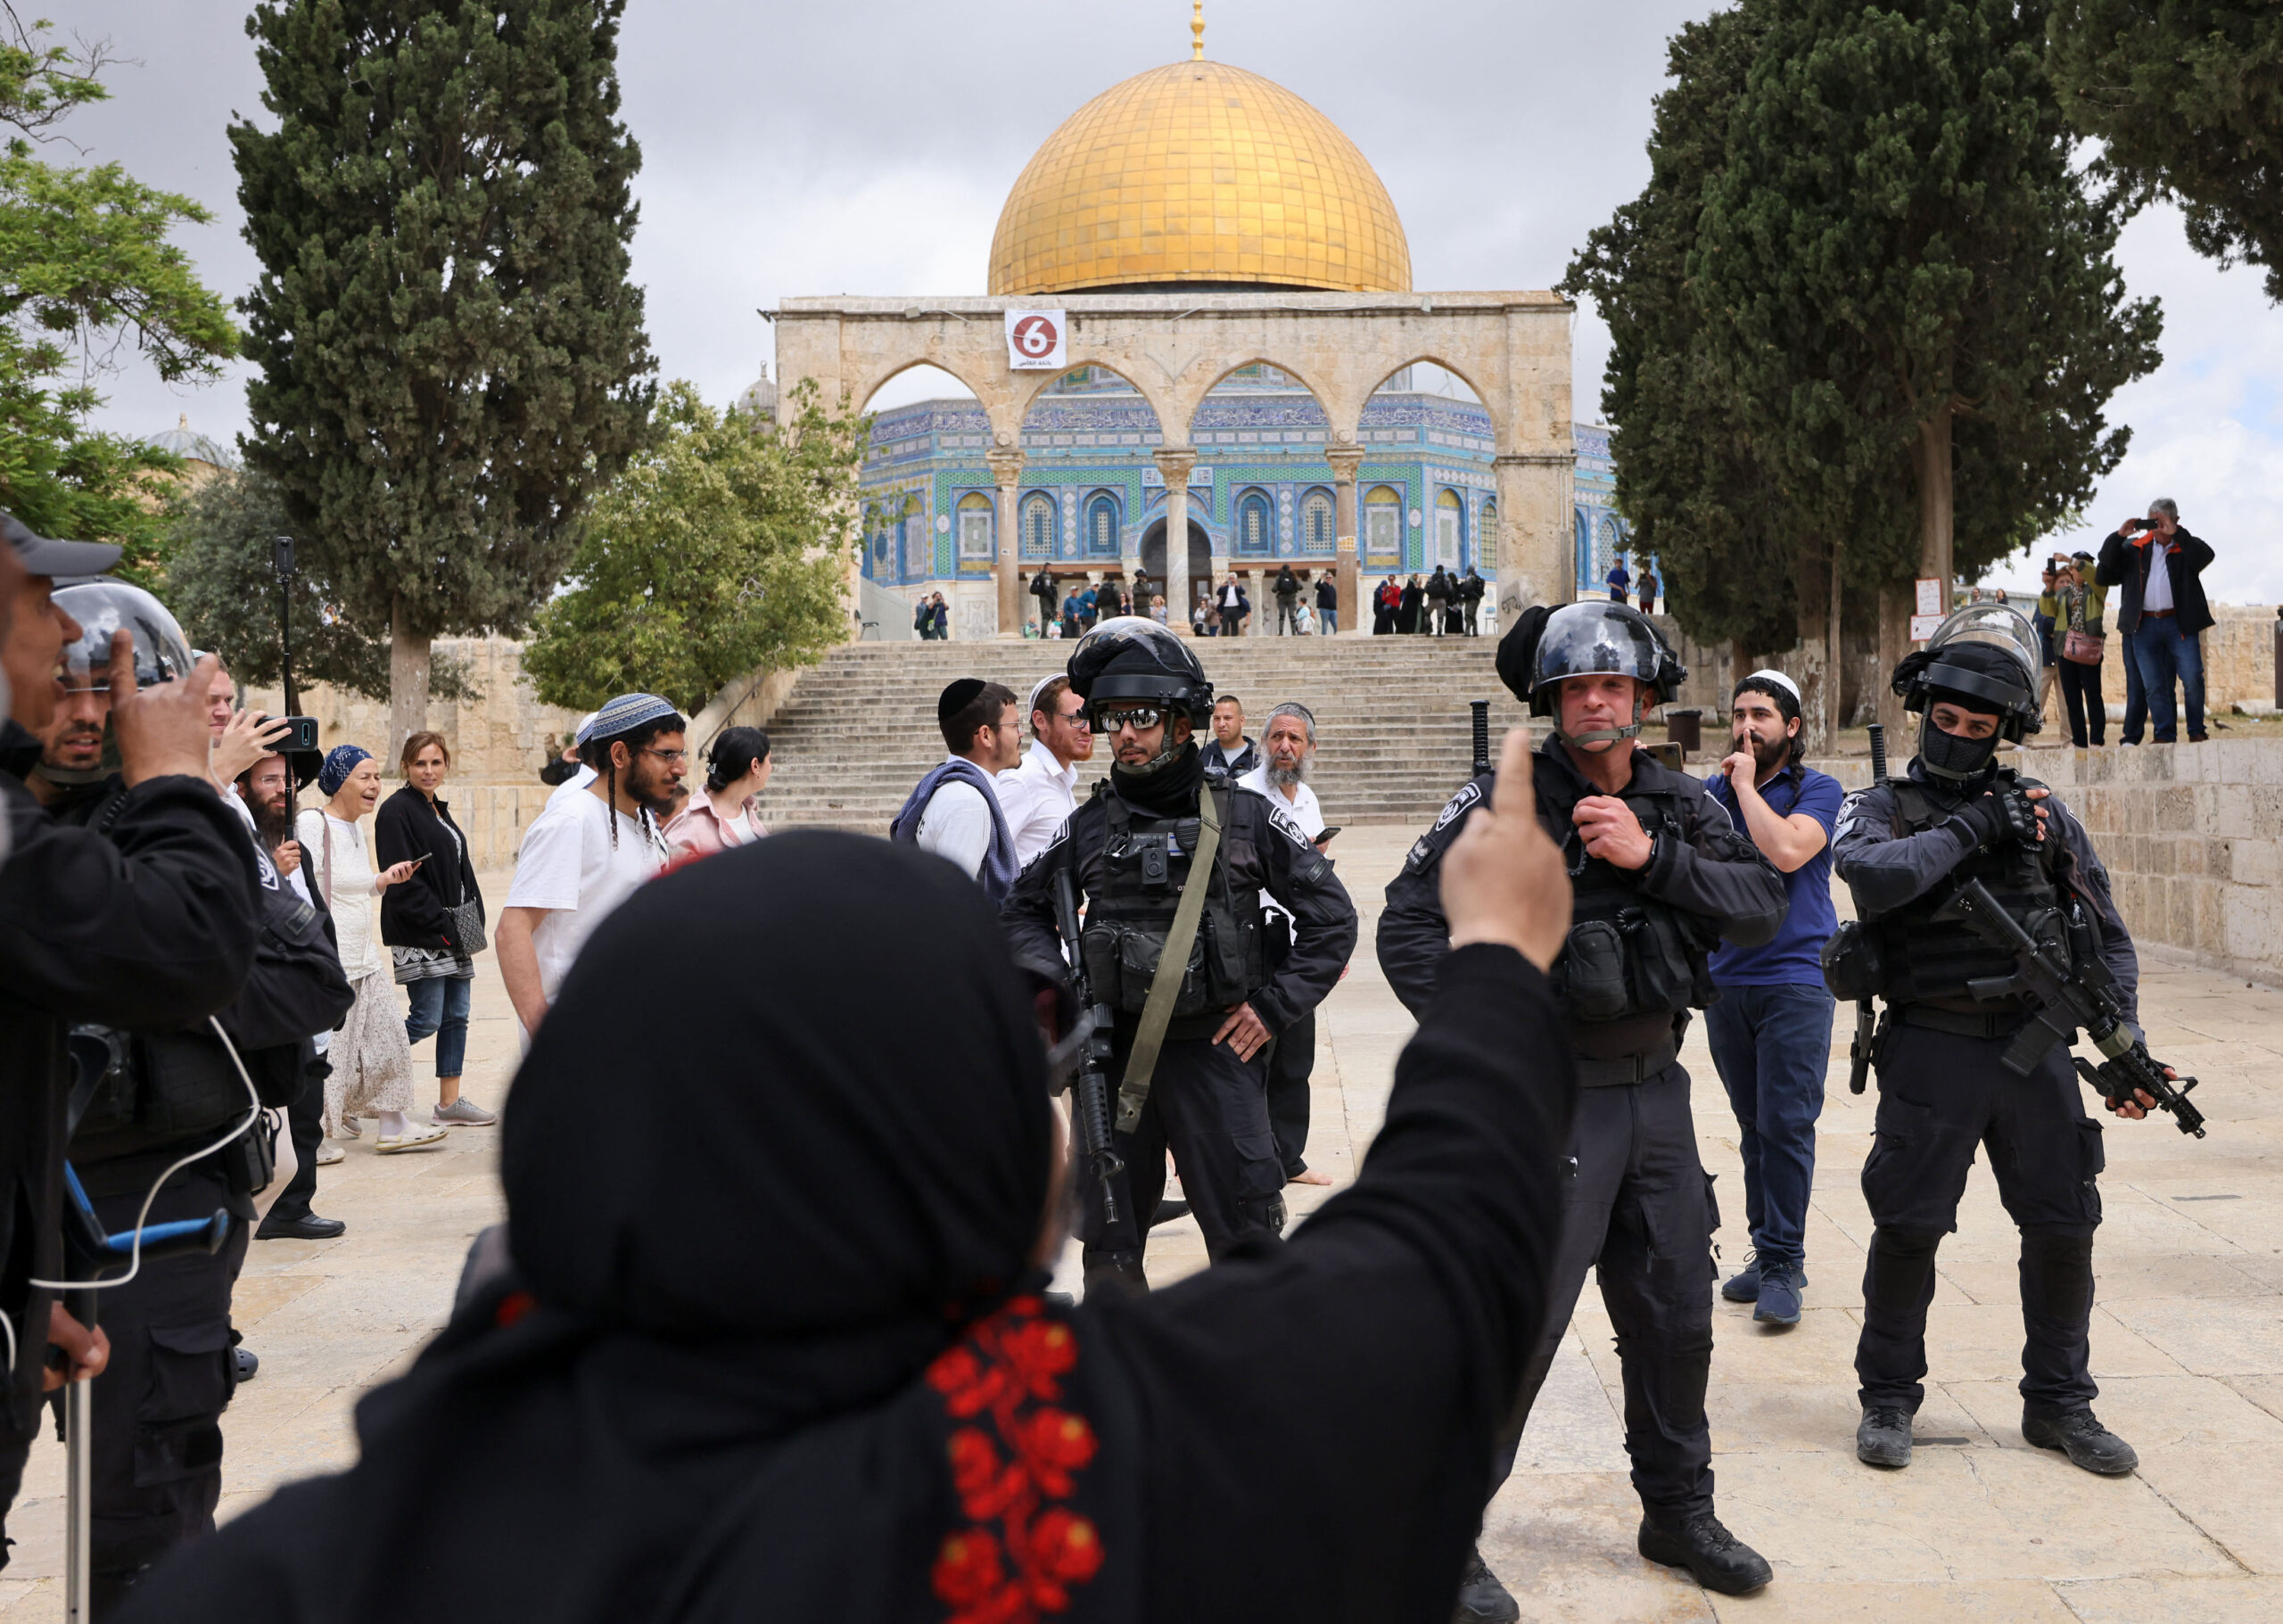 A Palestinian woman gestures as Israeli police accompany a group of Jewish visitors past the Dome of the Rock mosque at the al-Aqsa mosque compound in the Old City of Jerusalem on May 5, 2022. - Clashes erupted between Israelis and Palestinians at Jerusalem's Al-Aqsa mosque compound, after a 10-day cooling of tensions at the holy site, Israeli police said. The Israeli police said they had repelled "dozens of rioters" who had been "throwing stones and other objects" at the security forces. (Photo by AHMAD GHARABLI / AFP) (Photo by AHMAD GHARABLI/AFP via Getty Images)